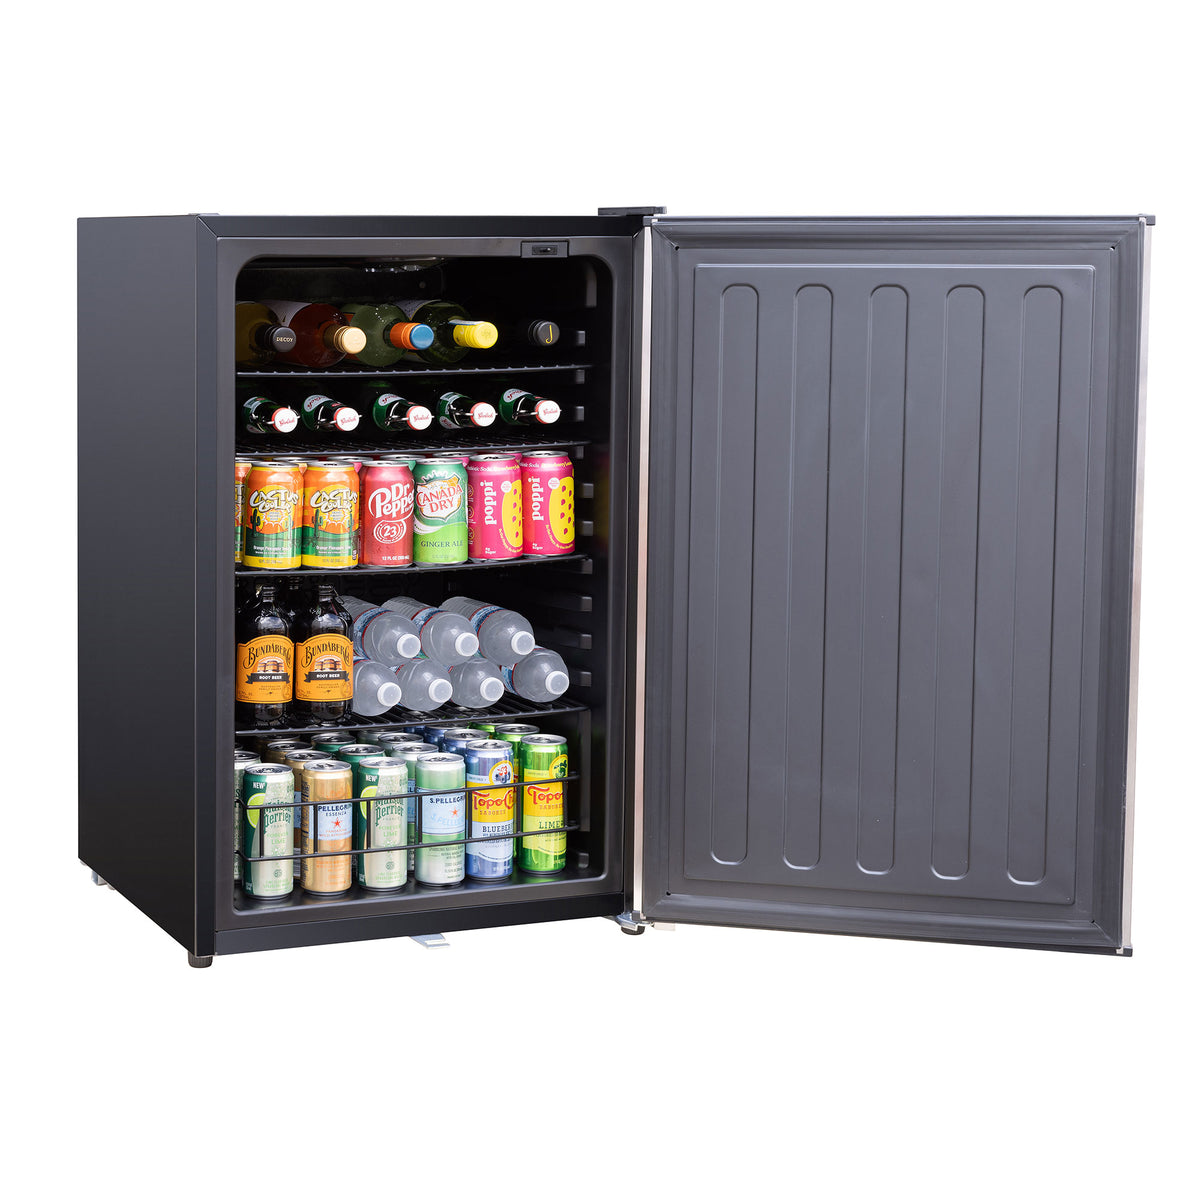 22" Outdoor Approved Compact Refrigerator